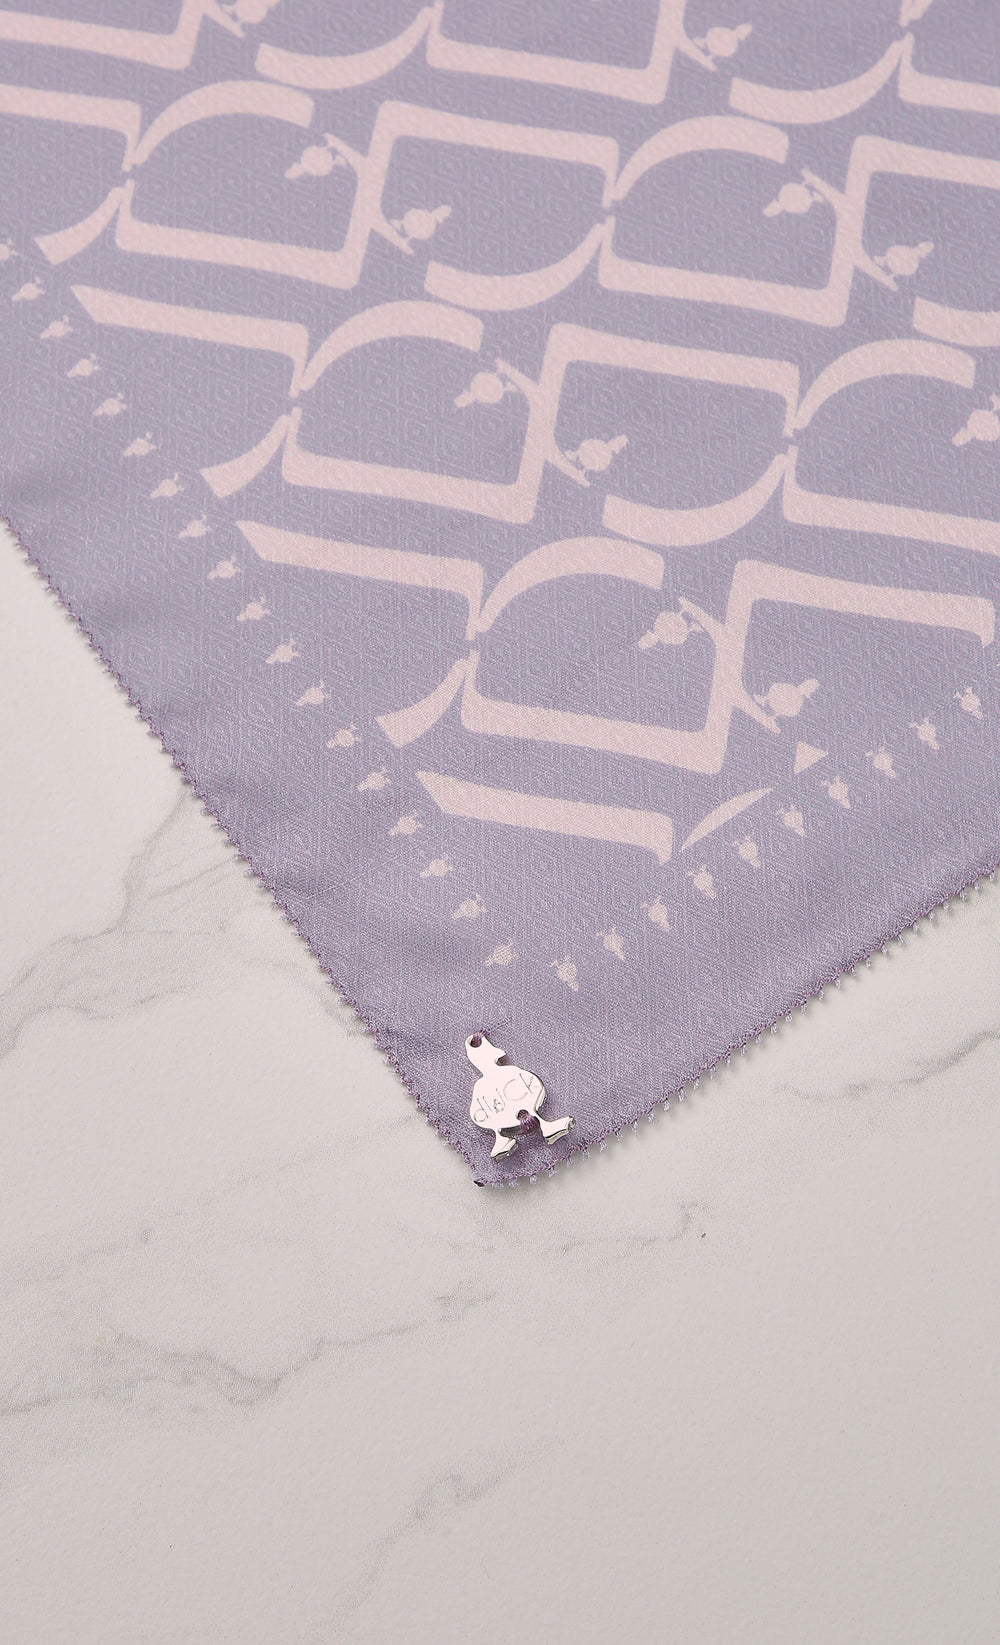 D Monogram dUCk Voile Square Scarf in Cotton Candy